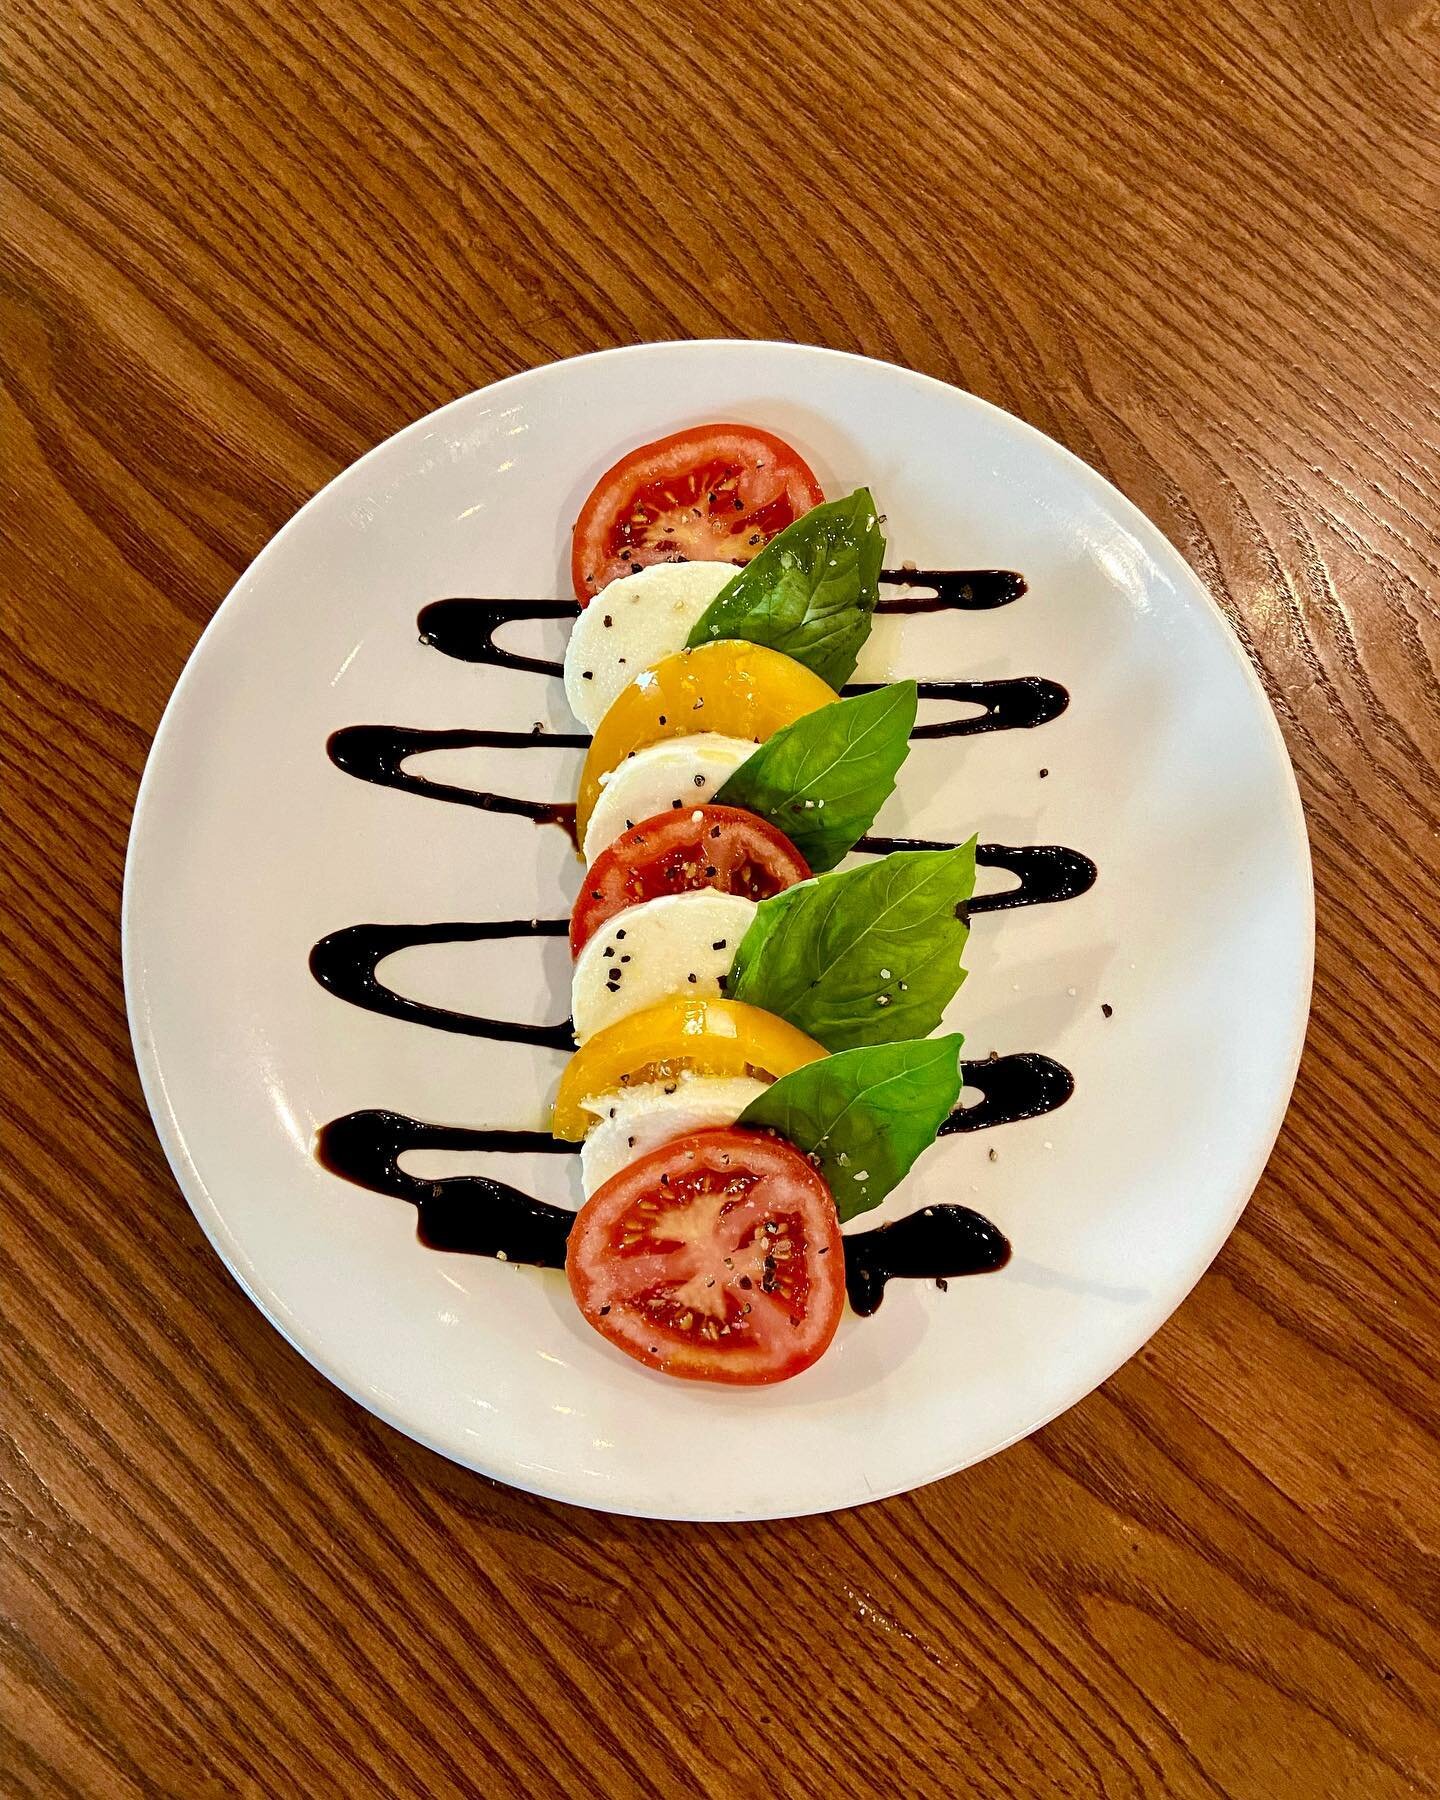 Back by popular demand! We&rsquo;re serving up our Camporosso Caprese Salad made with vine-ripened and heirloom tomatoes, fresh mozzarella, basil, and EVOO.